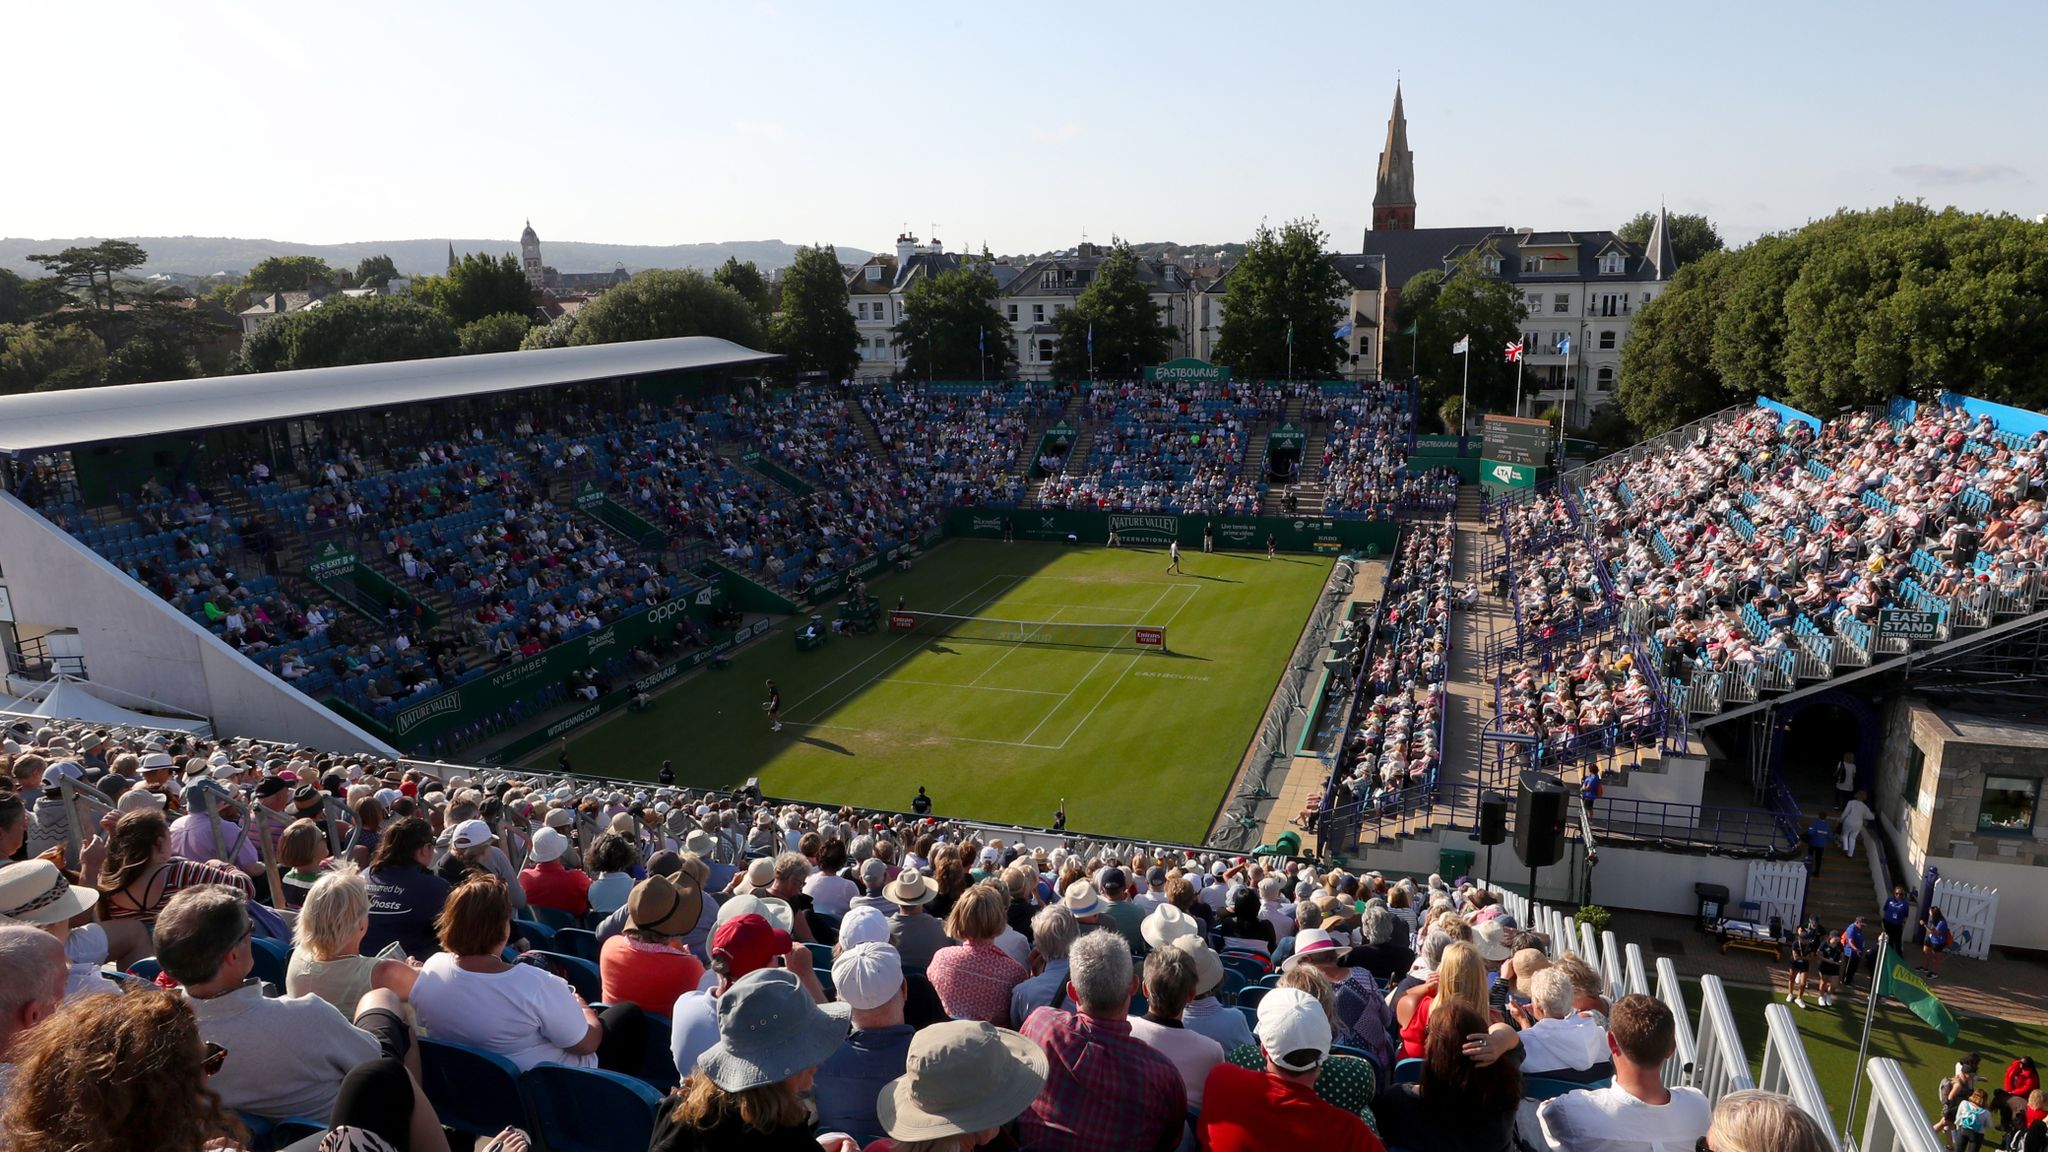 Lawn Tennis Association 'cautiously optimistic' fans can attend summer